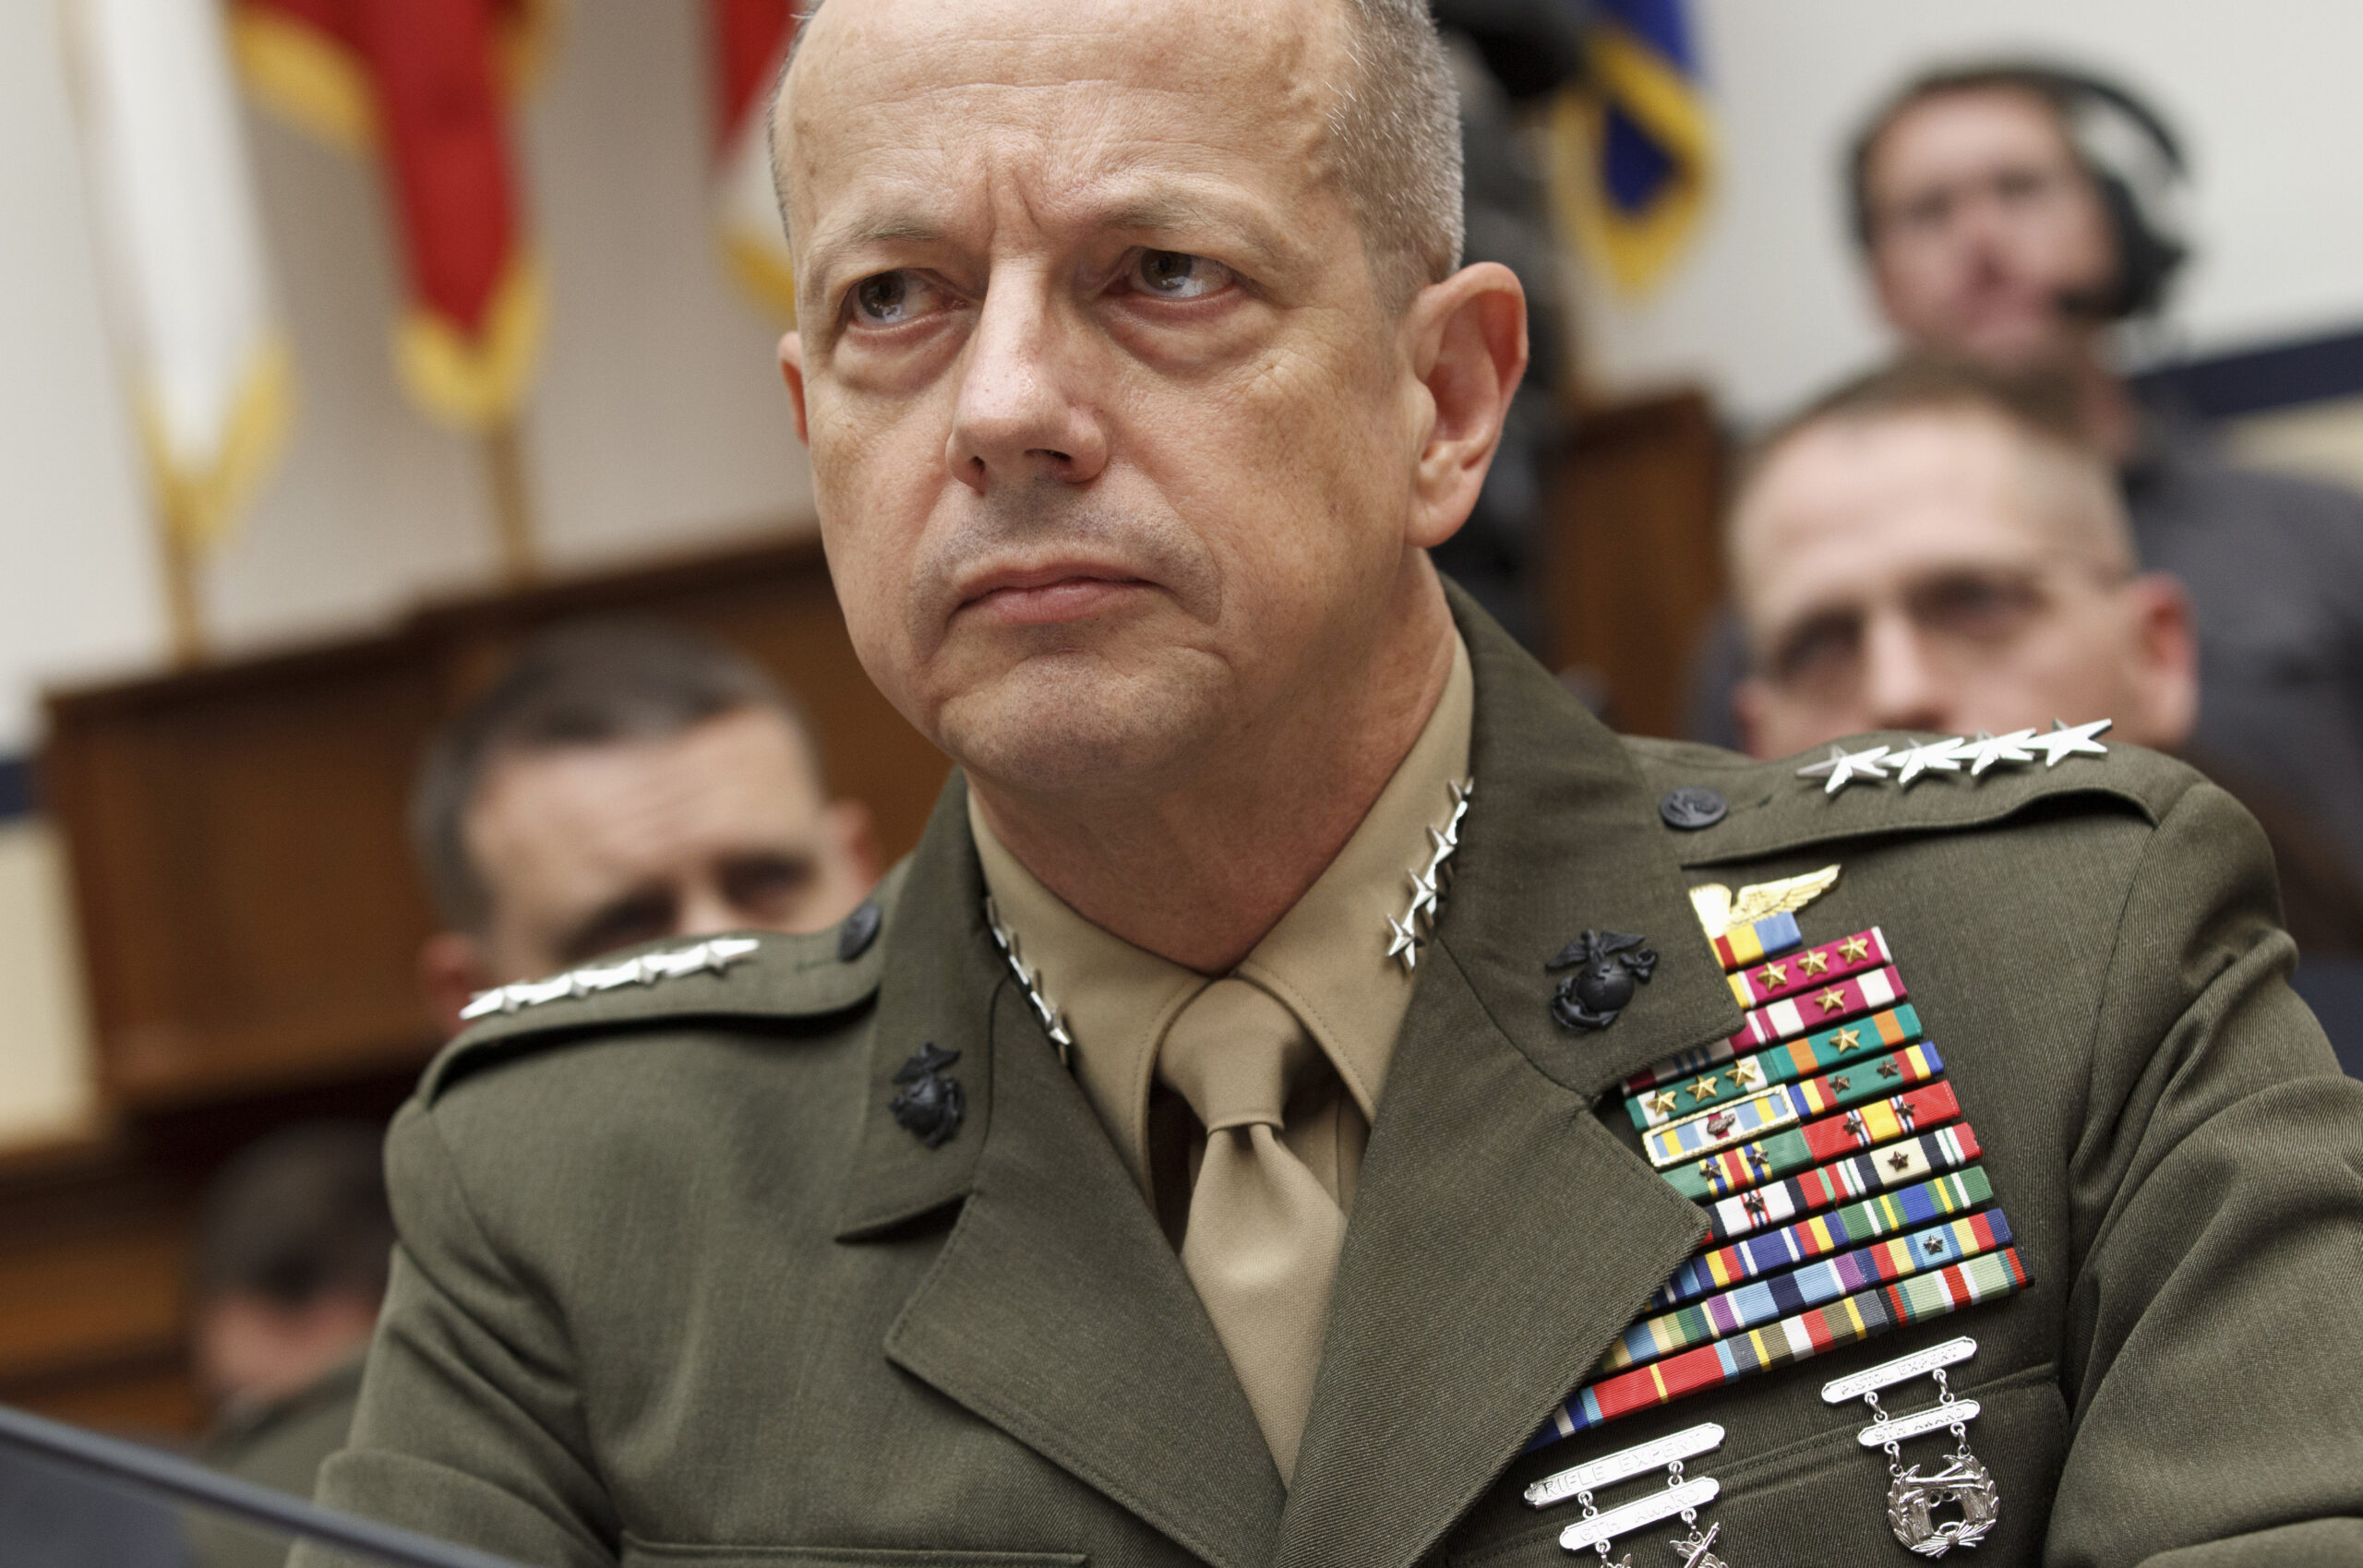 FILE - Marine Gen. John Allen, the top U.S. commander in Afghanistan, testifies on Capitol Hill in Washington on March 20, 2012. A former high-ranking U.S. ambassador admitted Friday, June 3, 2022, to illegal foreign lobbying on behalf of Qatar after demanding that prosecutors tell him why Allen, a retired four-star general who worked with him on the effort, has not been charged. (AP Photo/J. Scott Applewhite, File)